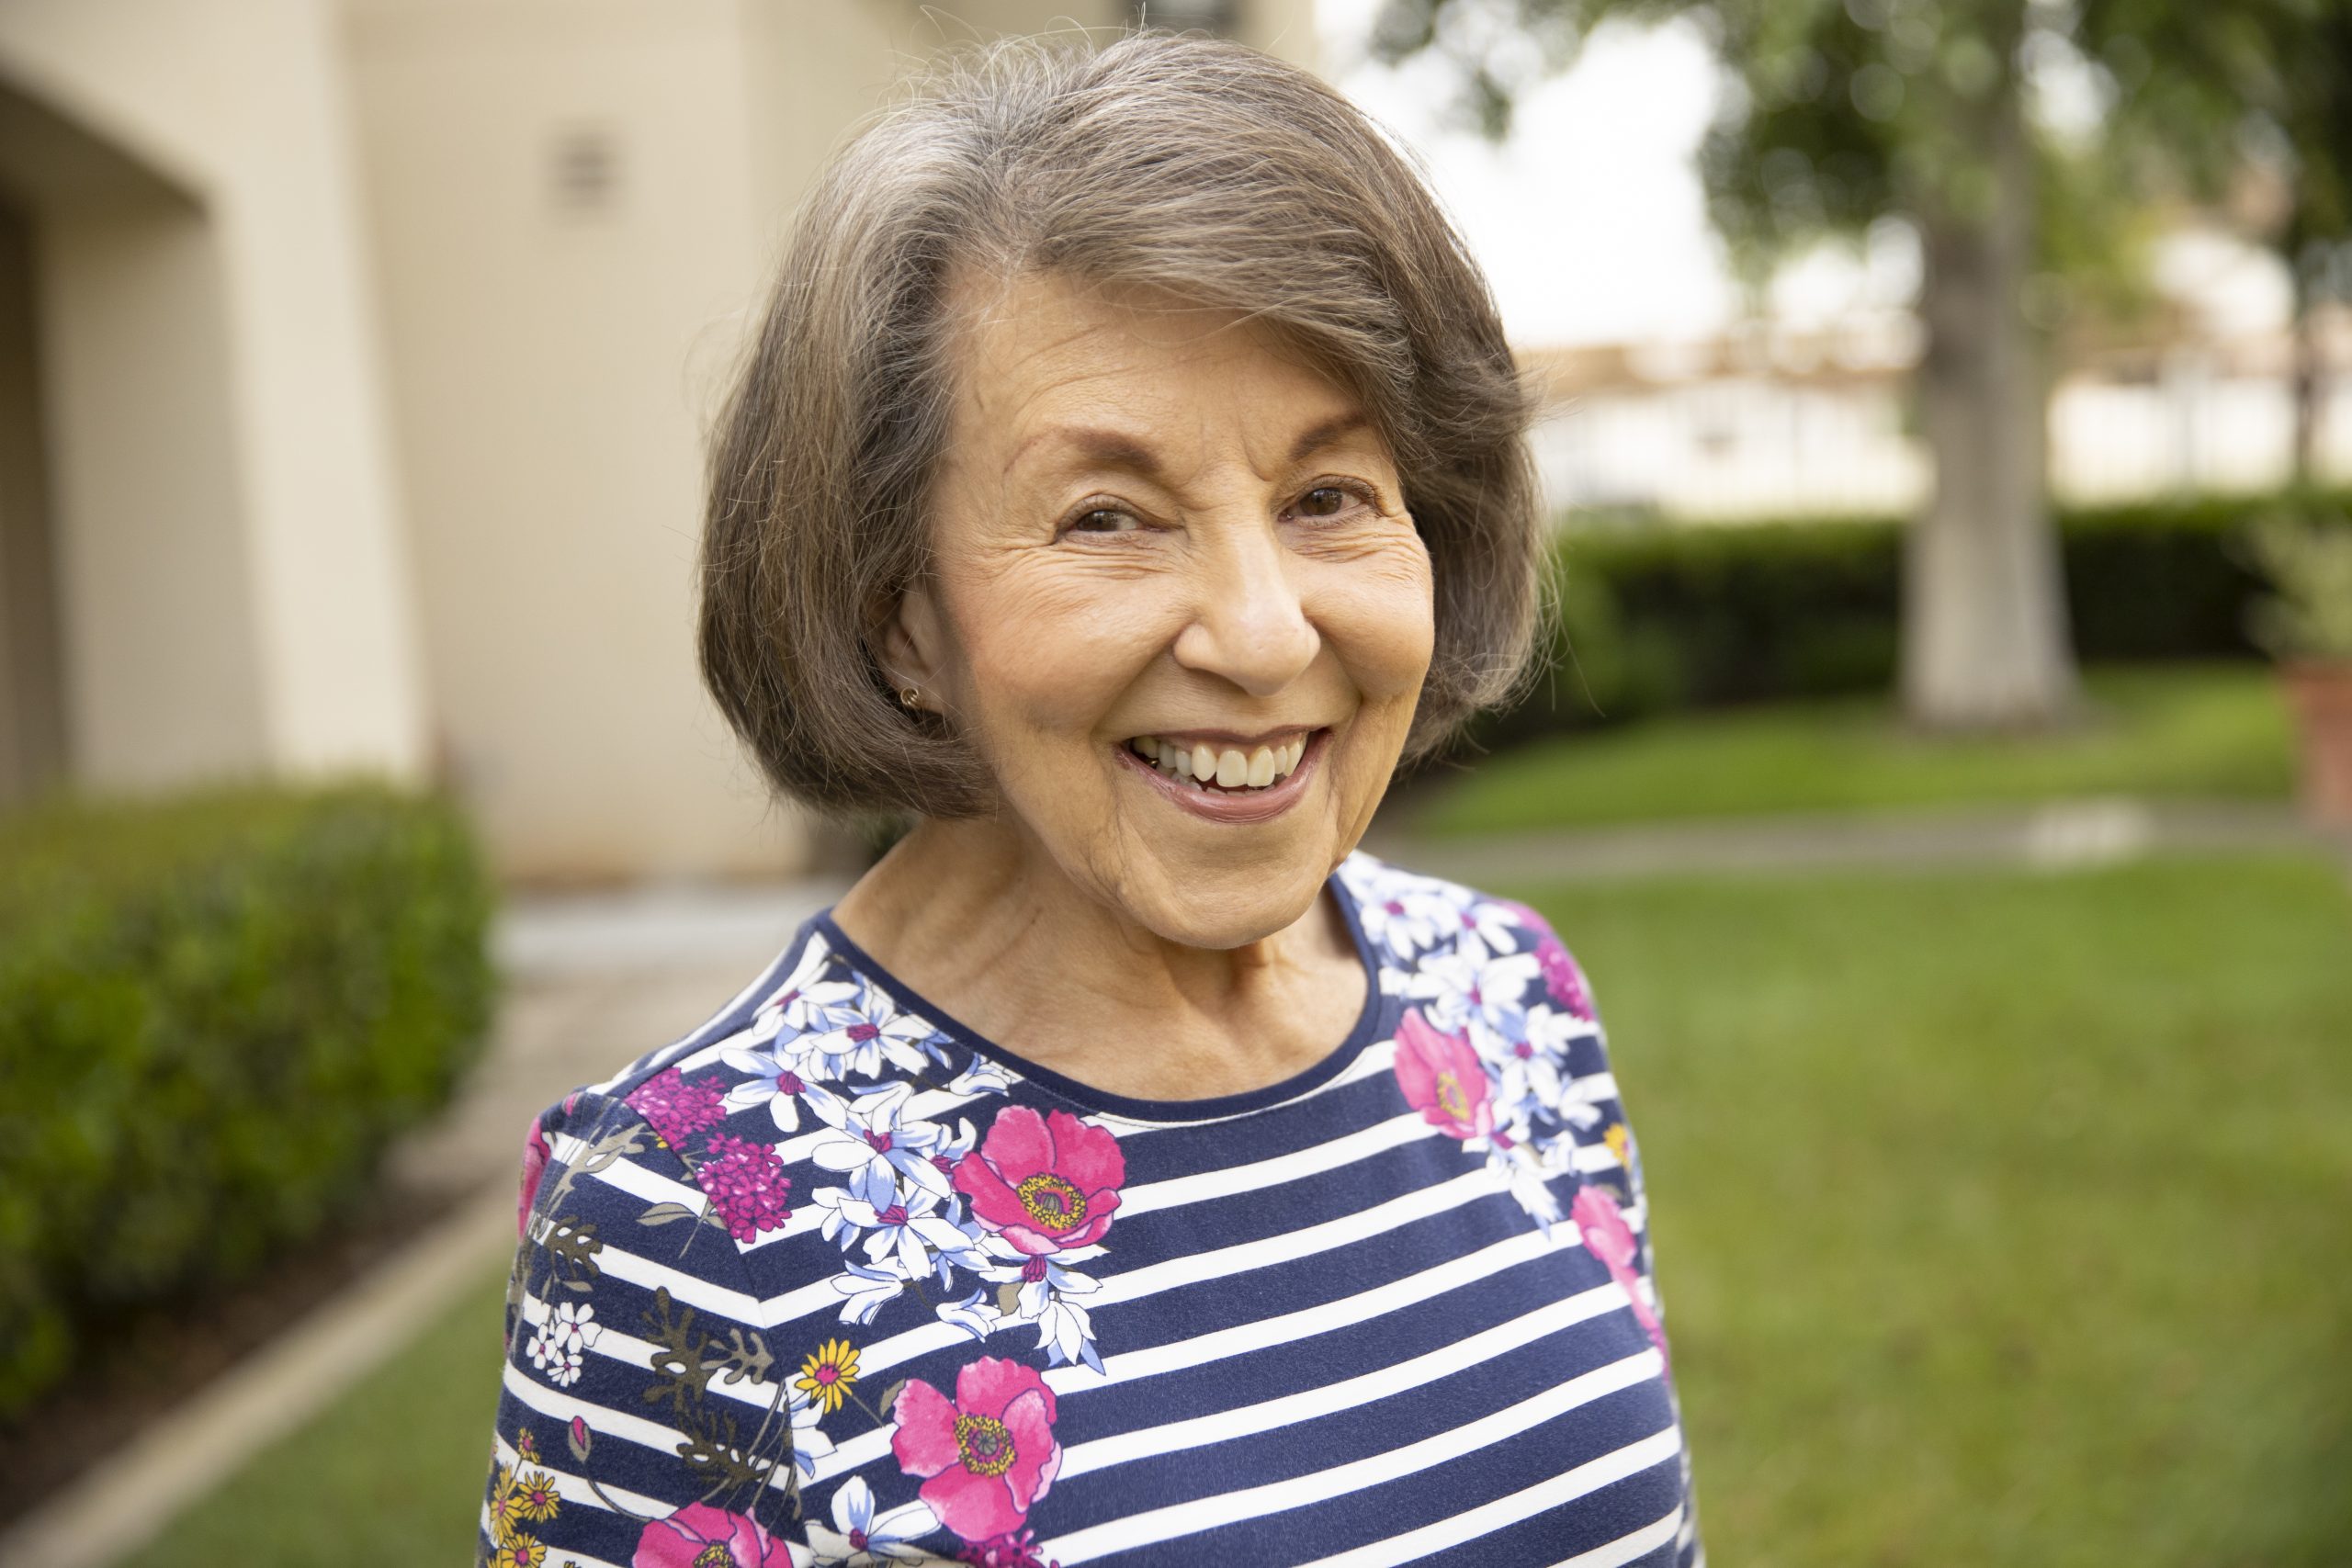 smiling happy elderly woman with striped shirt